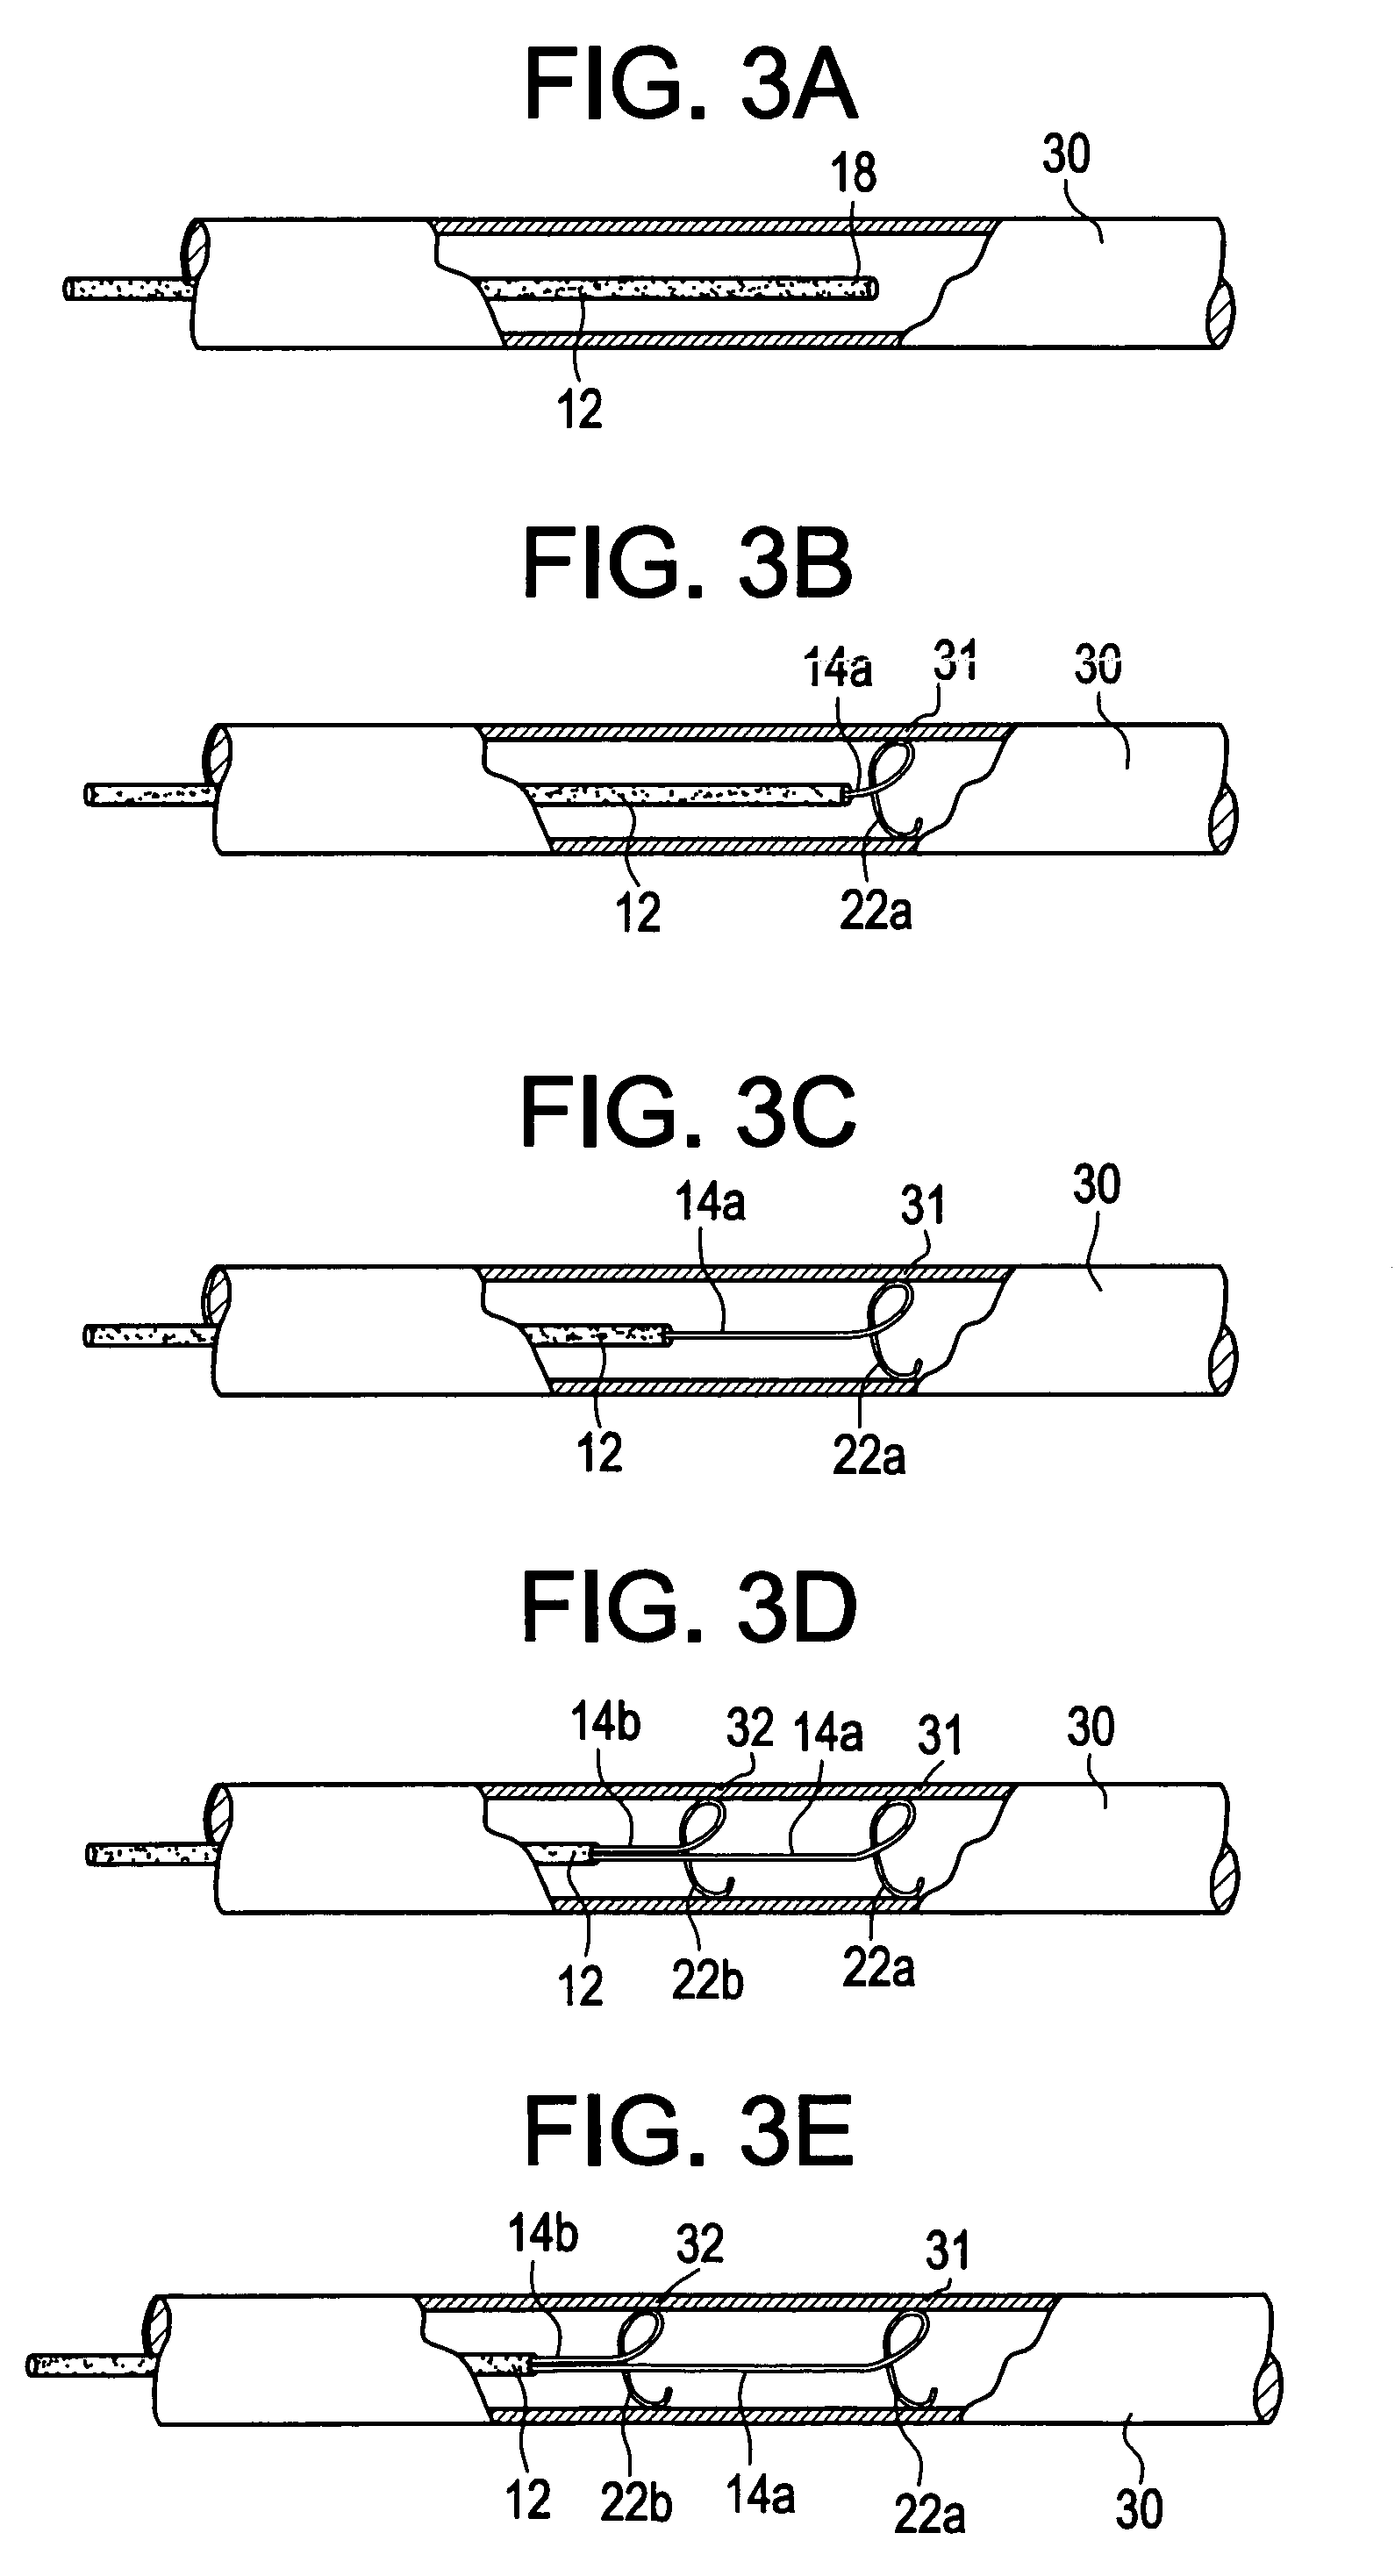 Intravascular device and method for axially stretching blood vessels